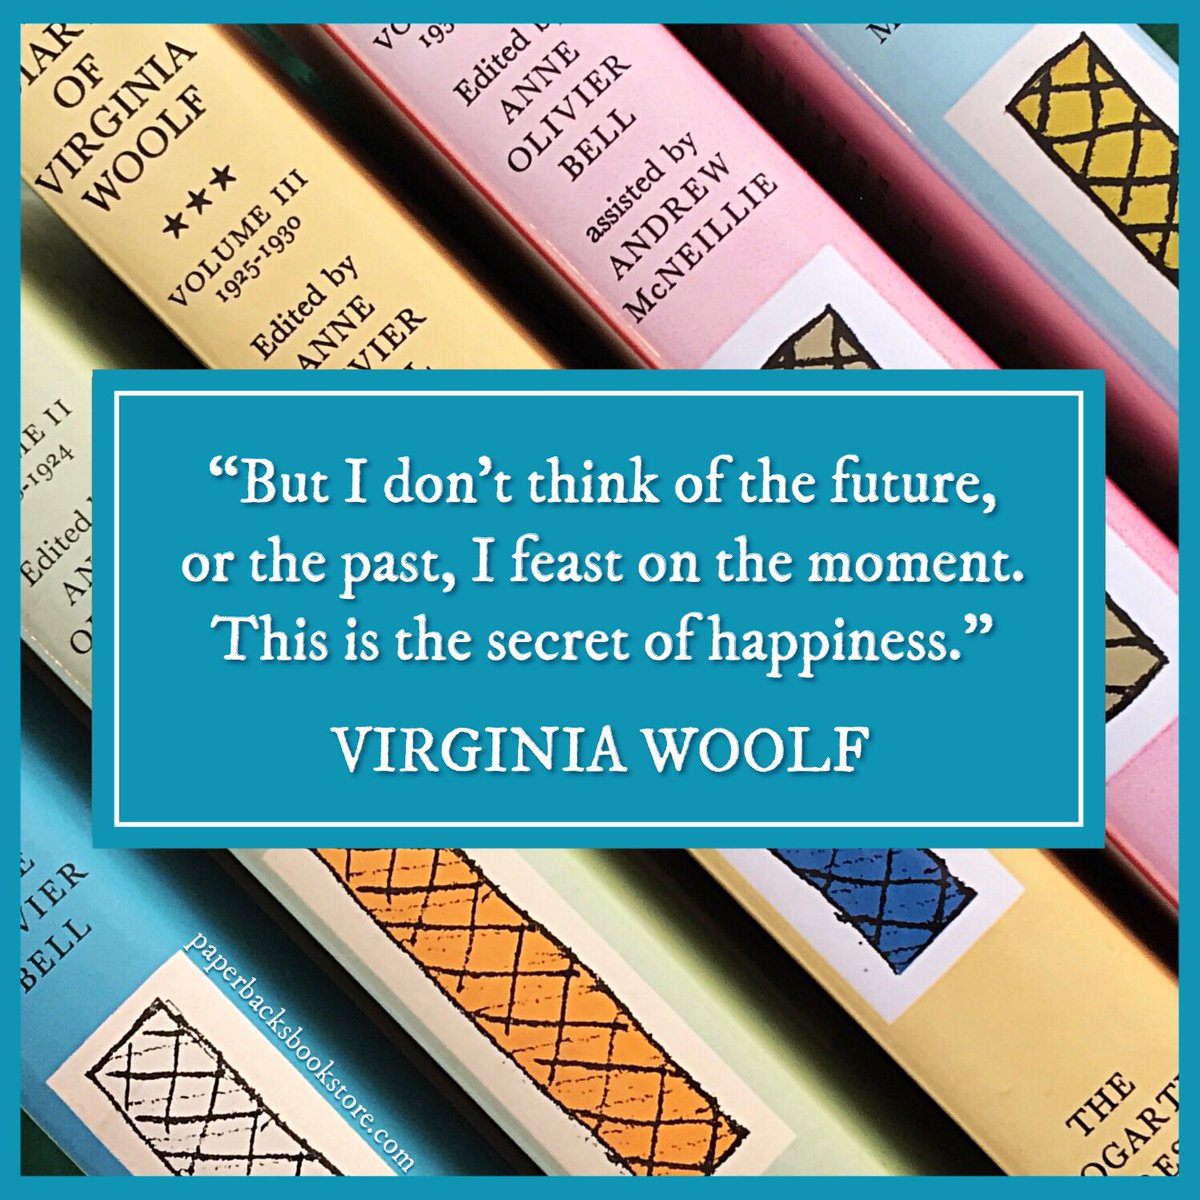 ❤️📚
“But I don't think of the future, or the past, I feast on the moment. This is the secret of happiness, but only reached now in middle age.” ~Virginia Woolf

#VirginiaWoolf #Coverart #bookcovers #books #booksandart #literaryart #bookpile #bookstack #bookspines #beautifulbooks